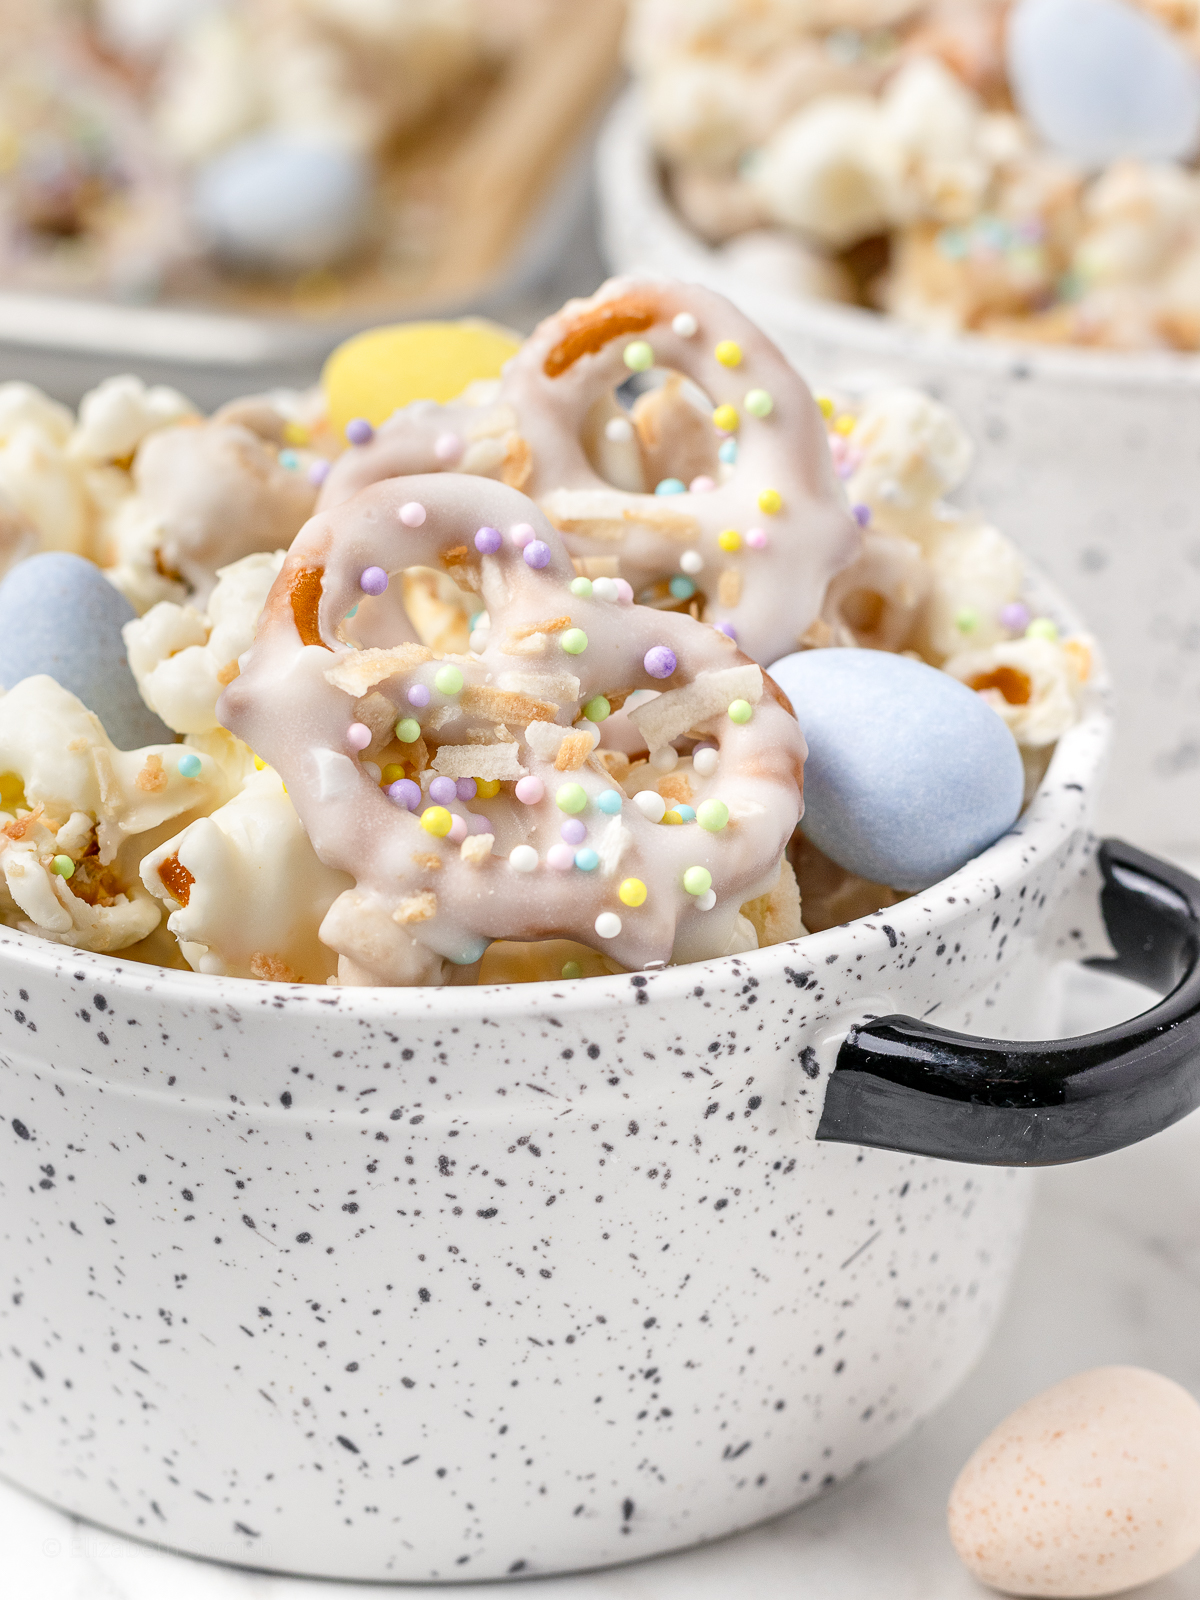 A bowl of Bunny Popcorn Snack Mix. Close up of a white chocolate covered pretzel with toasted coconut and pastel Easter sprinkles stuck to it. Colorful milk chocolate candy eggs and more bowls of popcorn snack mix on the side.